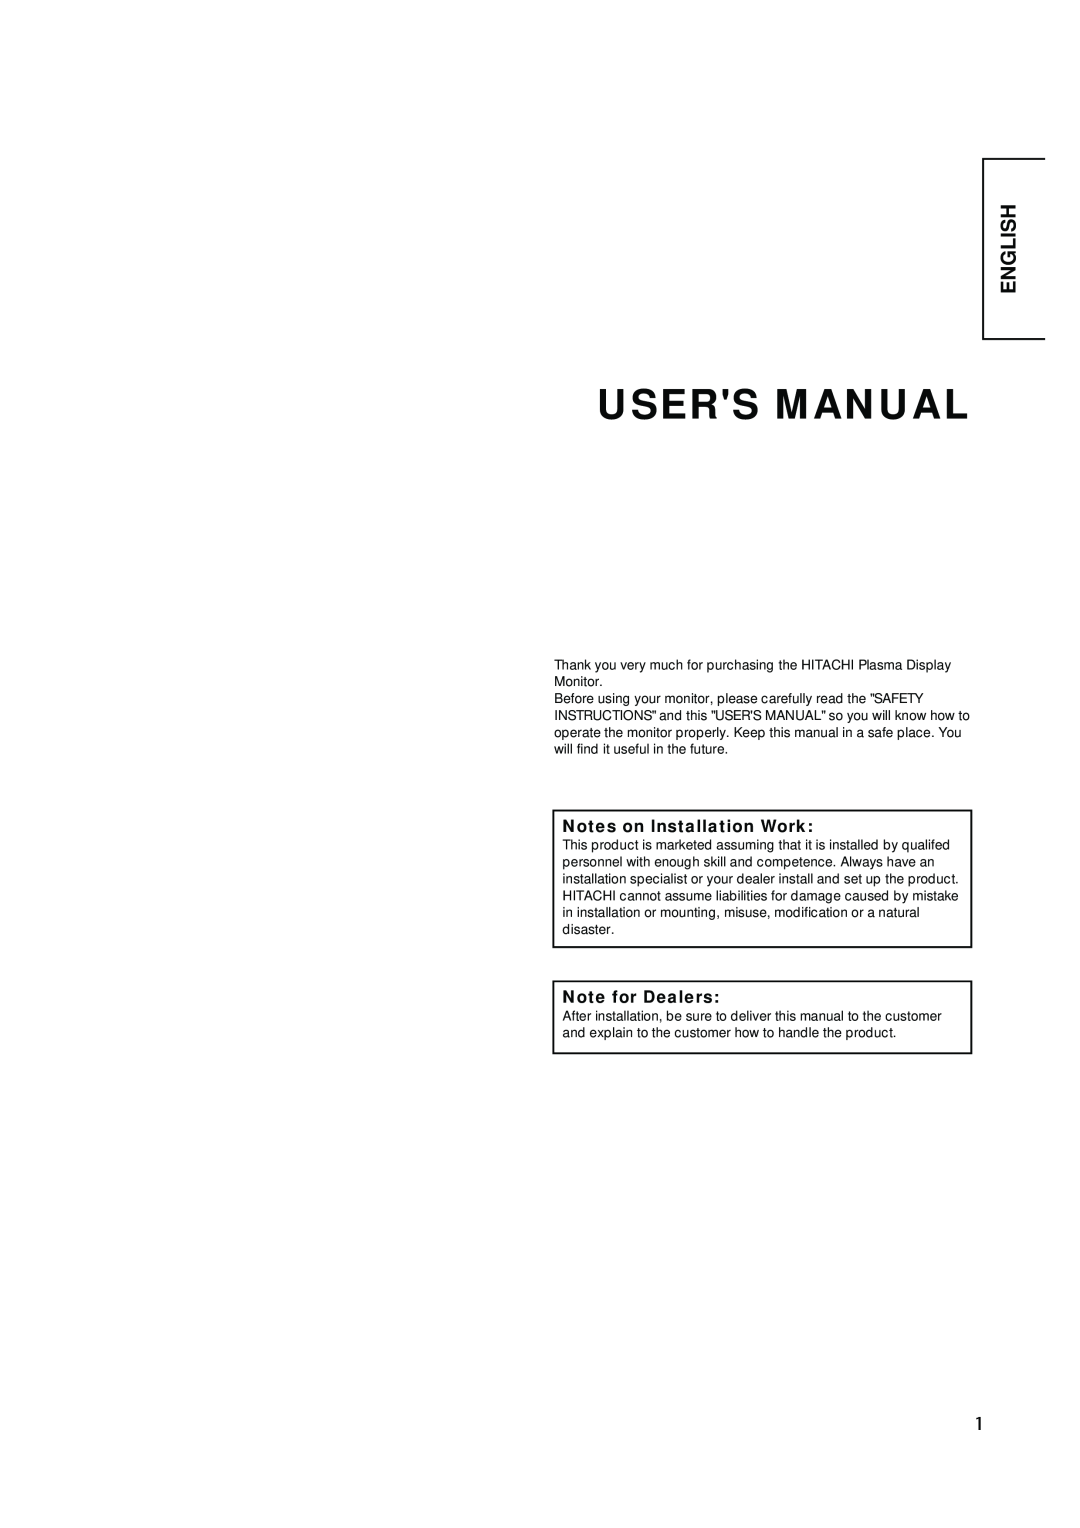 Hitachi PW1A user manual Users Manual, English, Notes on lnstallation Work, Note for Dealers 